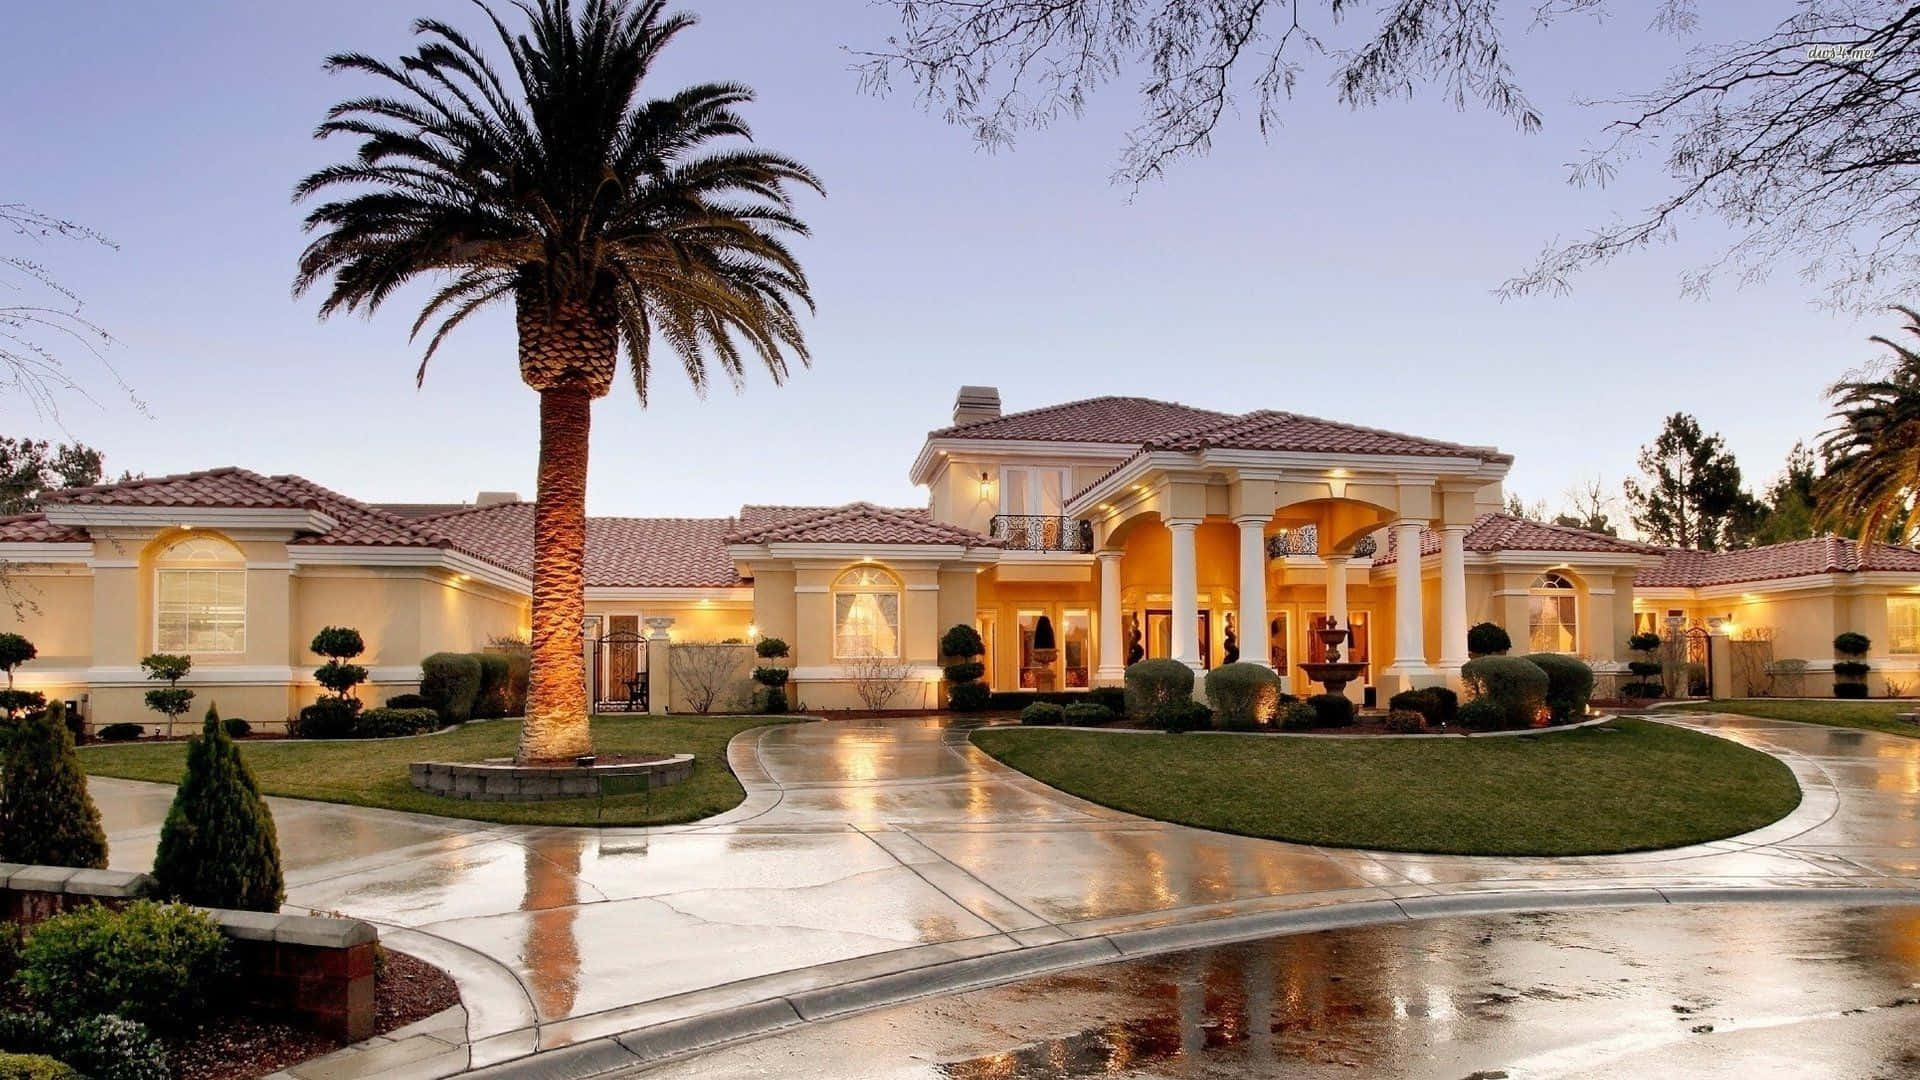 “Feel like royalty with this stunning Mansion”